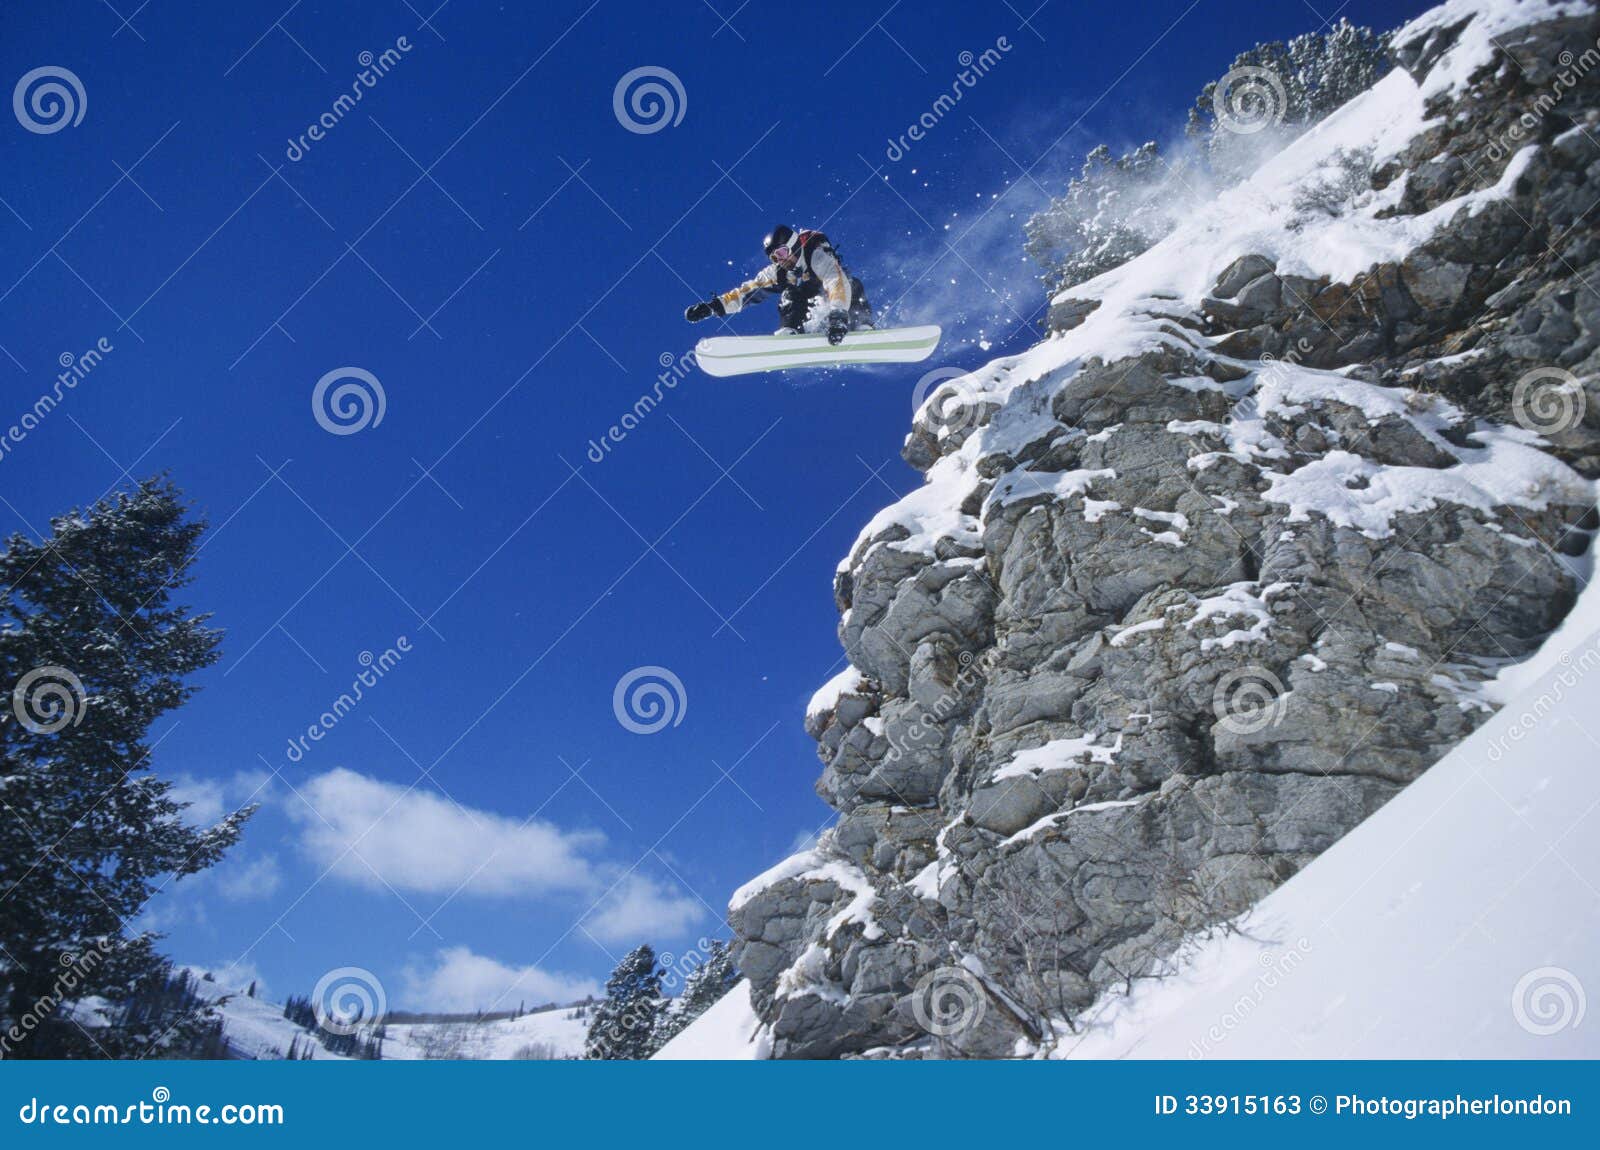 person on snowboard jumping midair